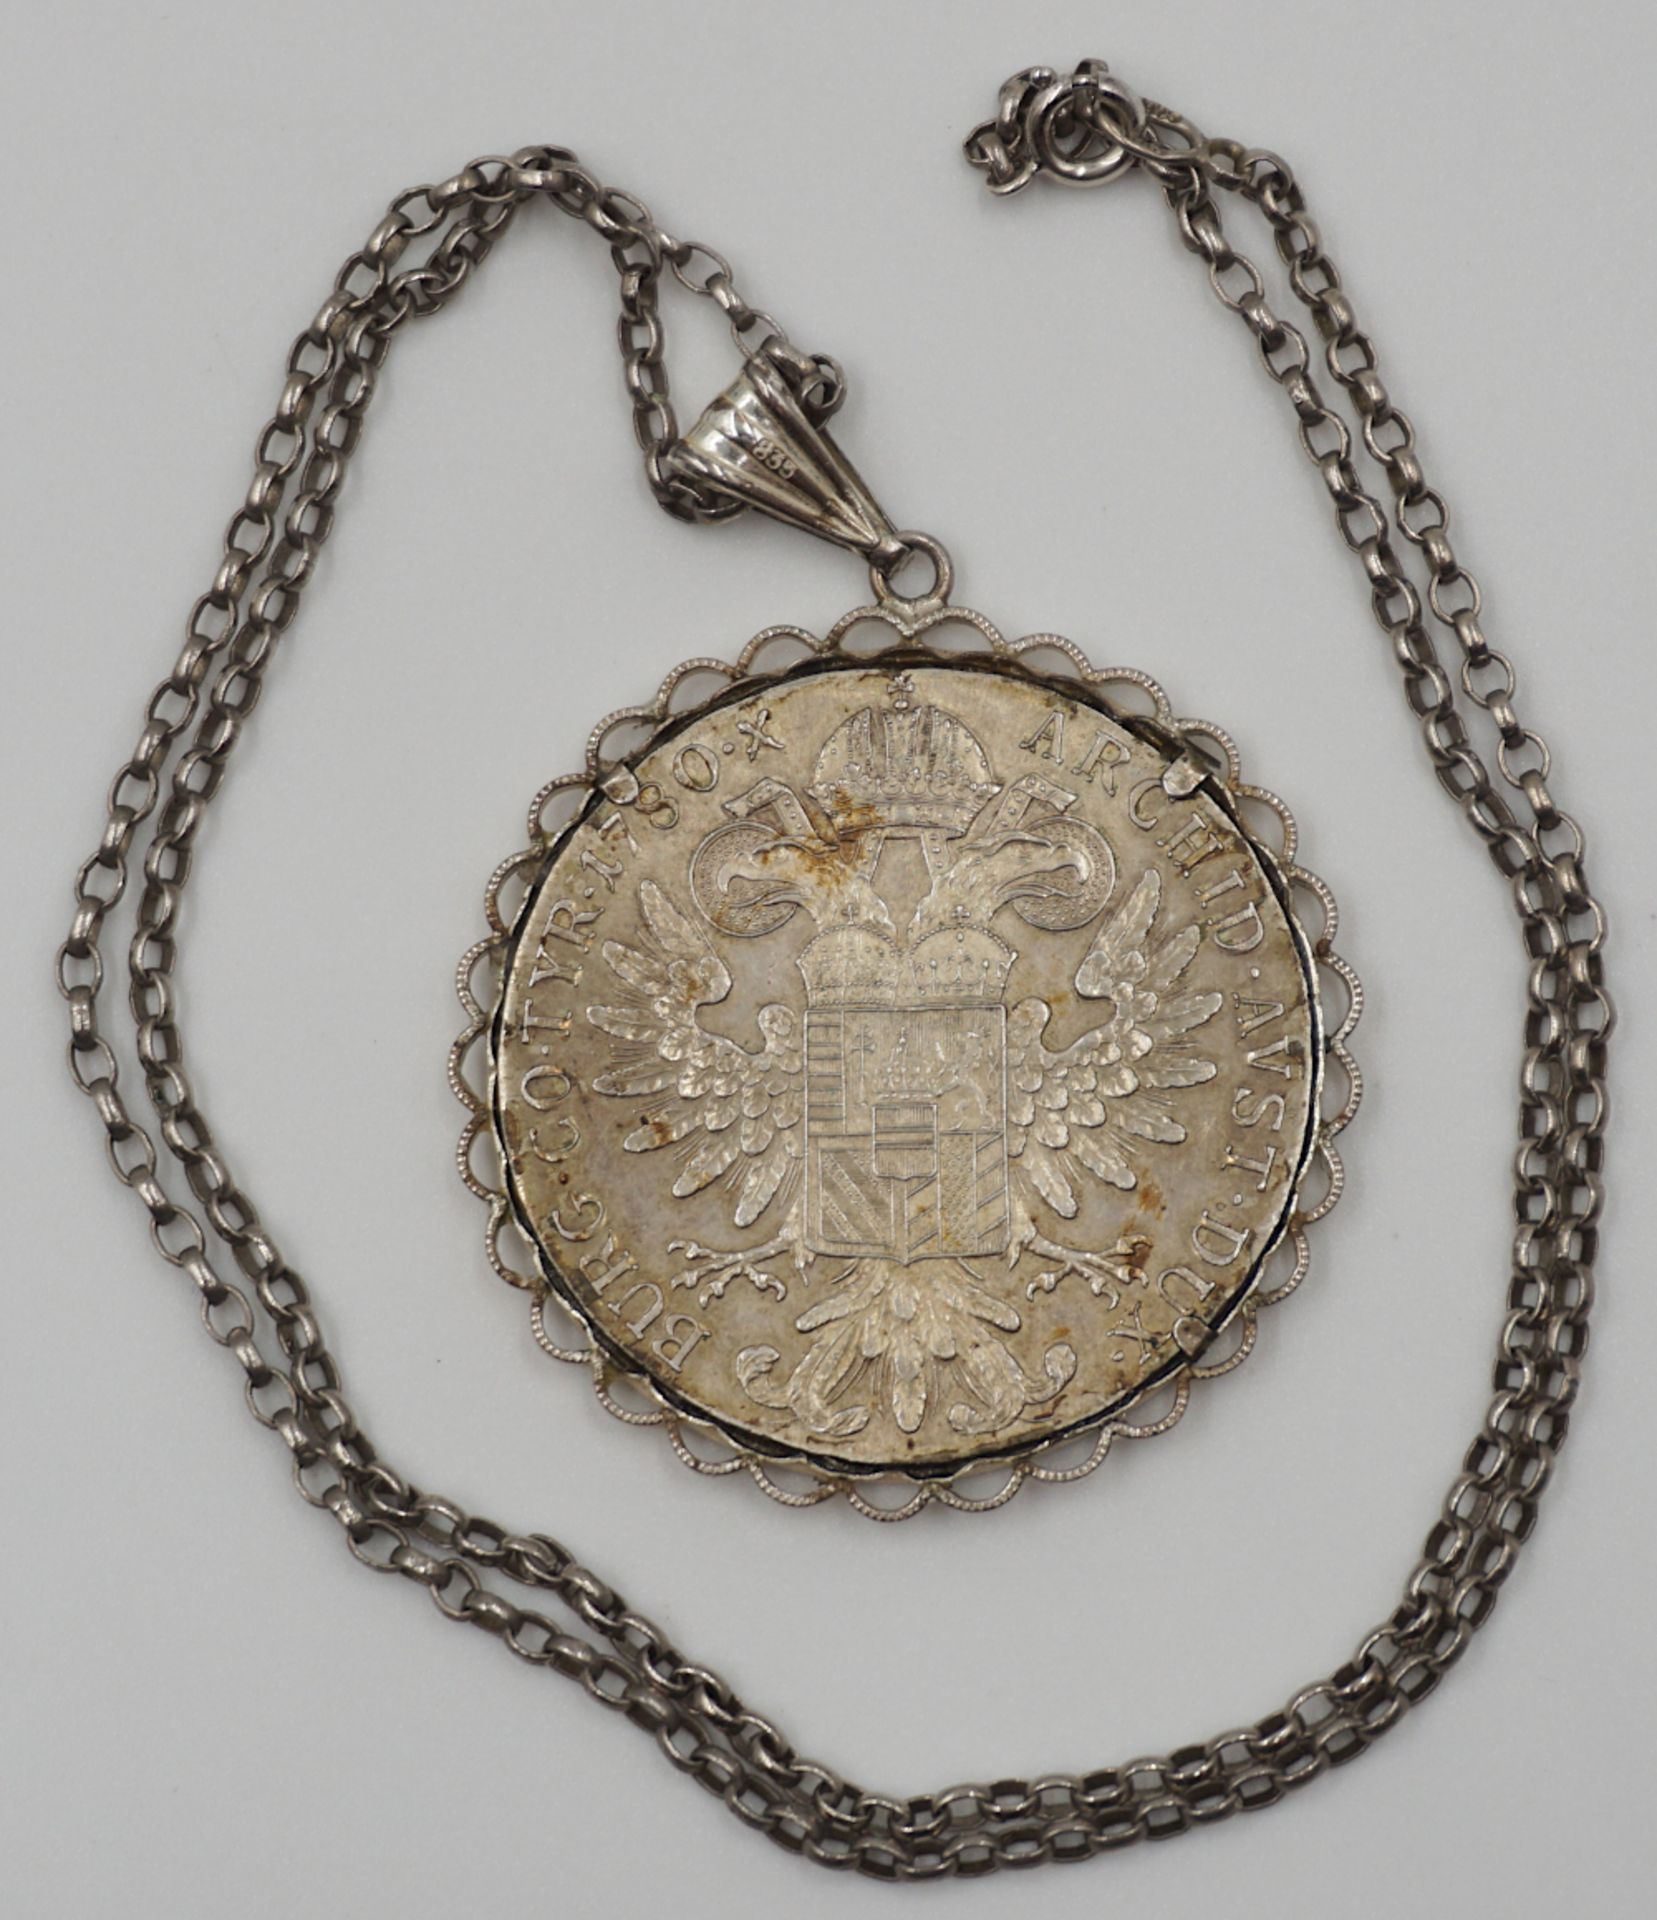 1 Kette, 1 Anhänger mit gefasster Münze, je Silber "Maria Theresia" Gsp. - Image 2 of 2